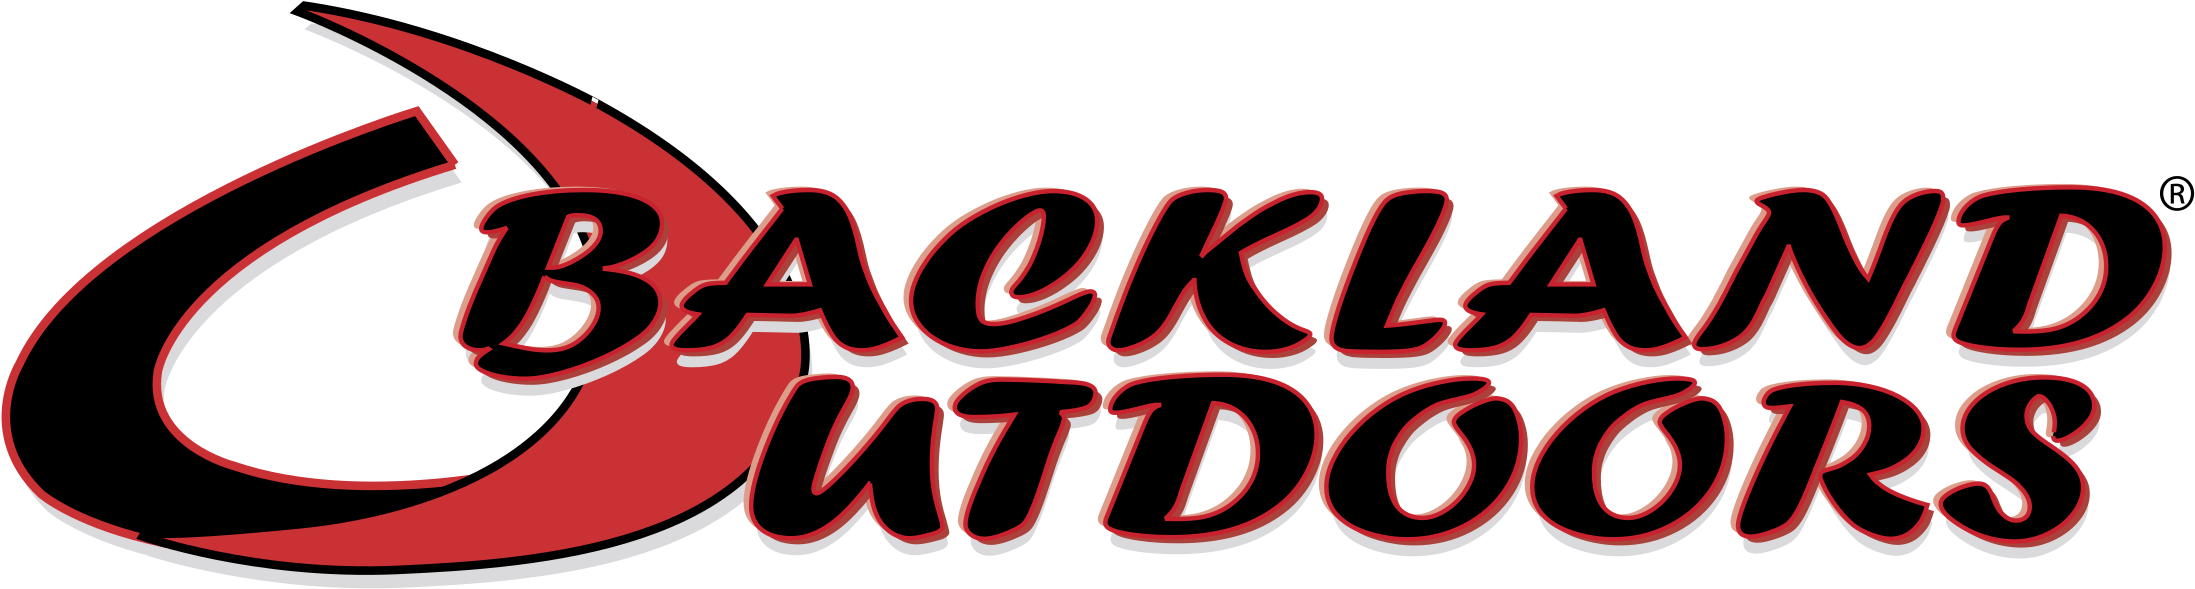 Backland Outdoors Logo PNG